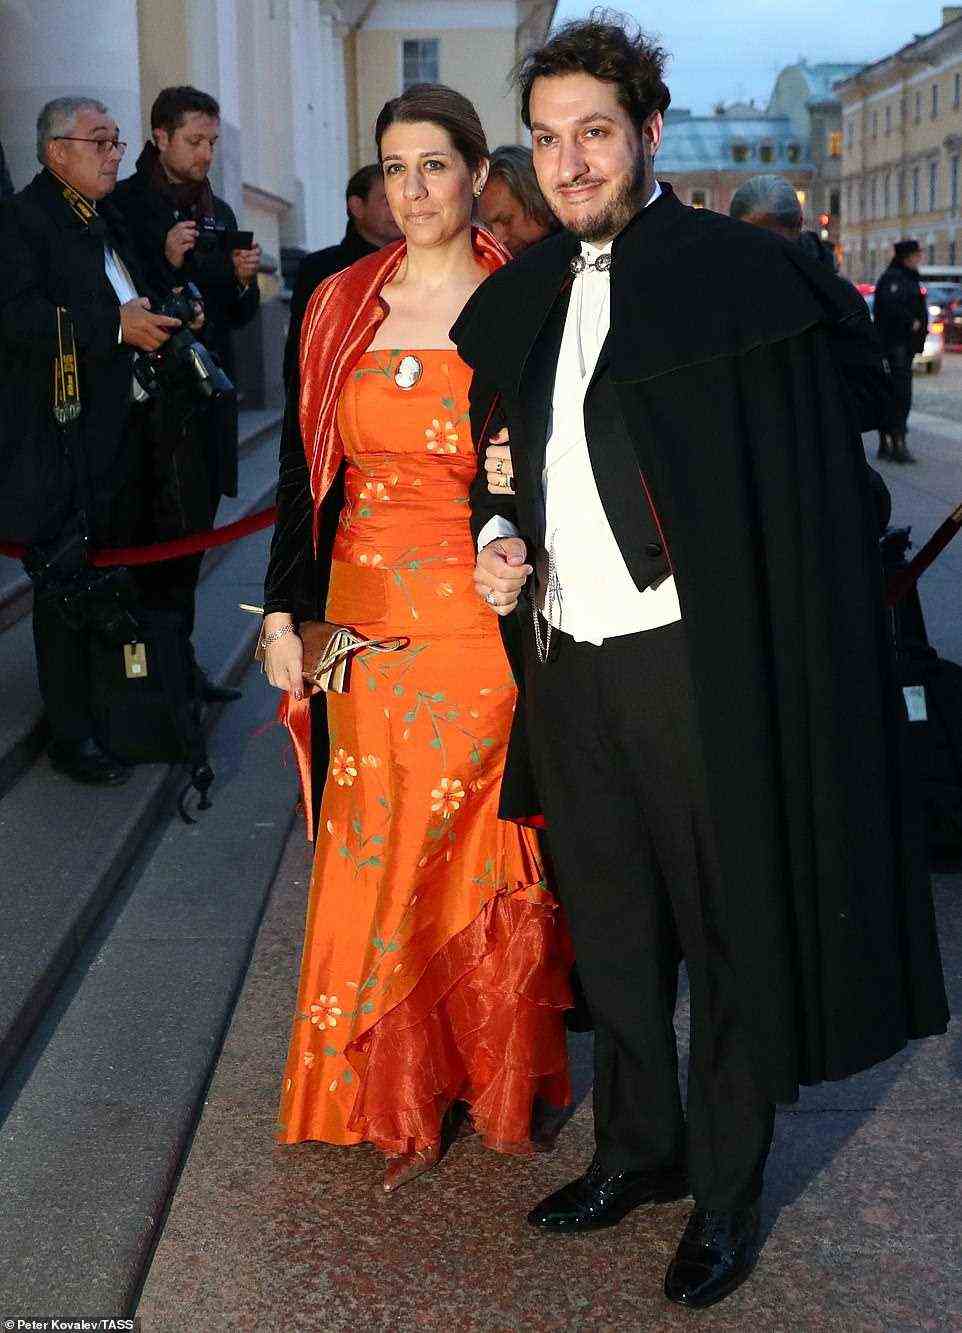 Democrat Youth Community of Europe (DEMYC) Chairman Javier Hurtado Mira and his date arrive for the reception at the Russian Museum of Ethnography